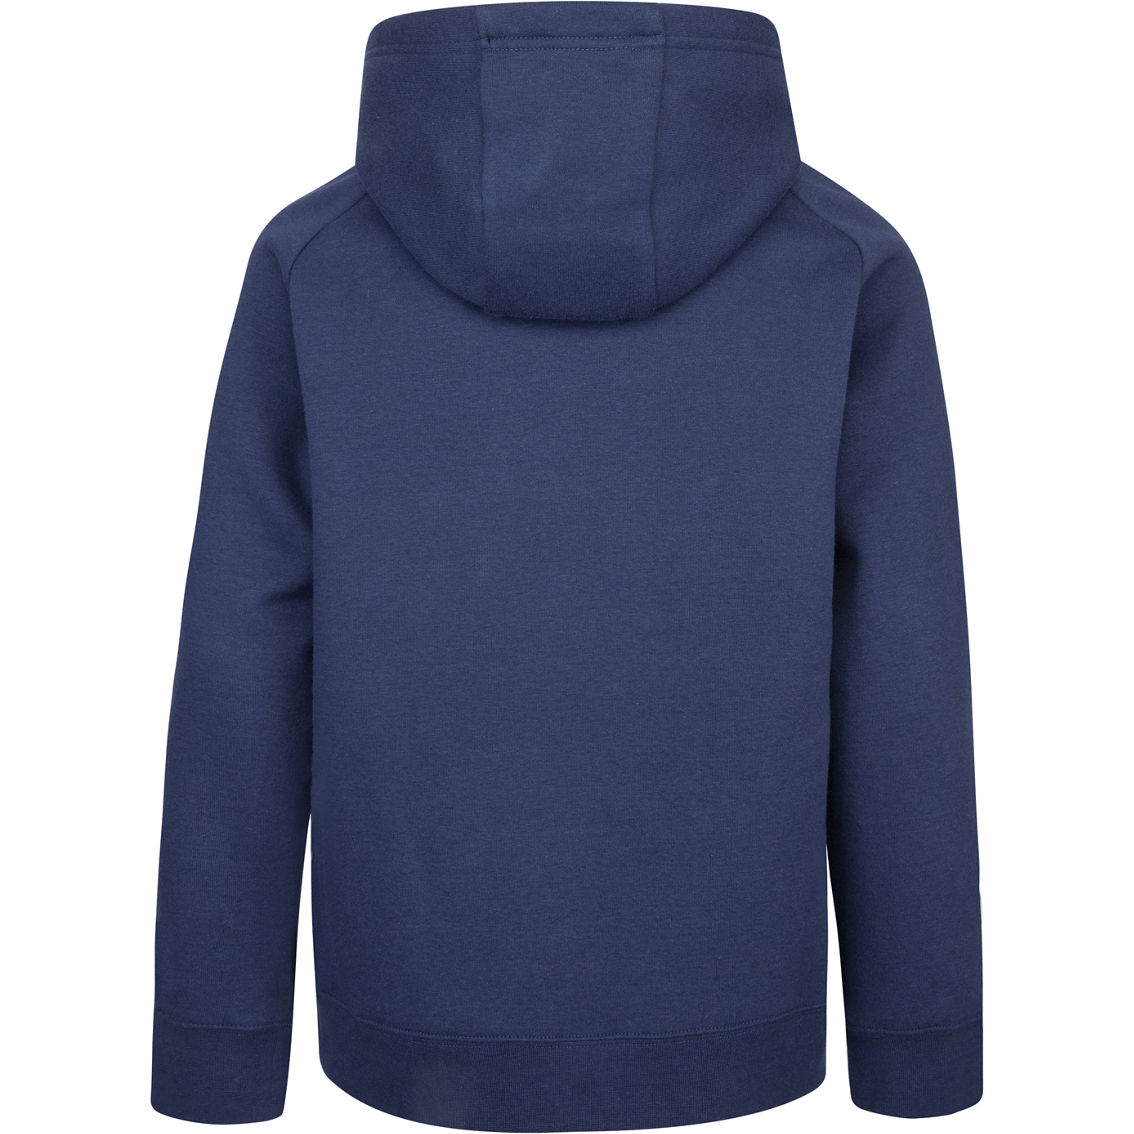 3Brand by Russell Wilson Boys Level Up Hoodie - Image 2 of 3